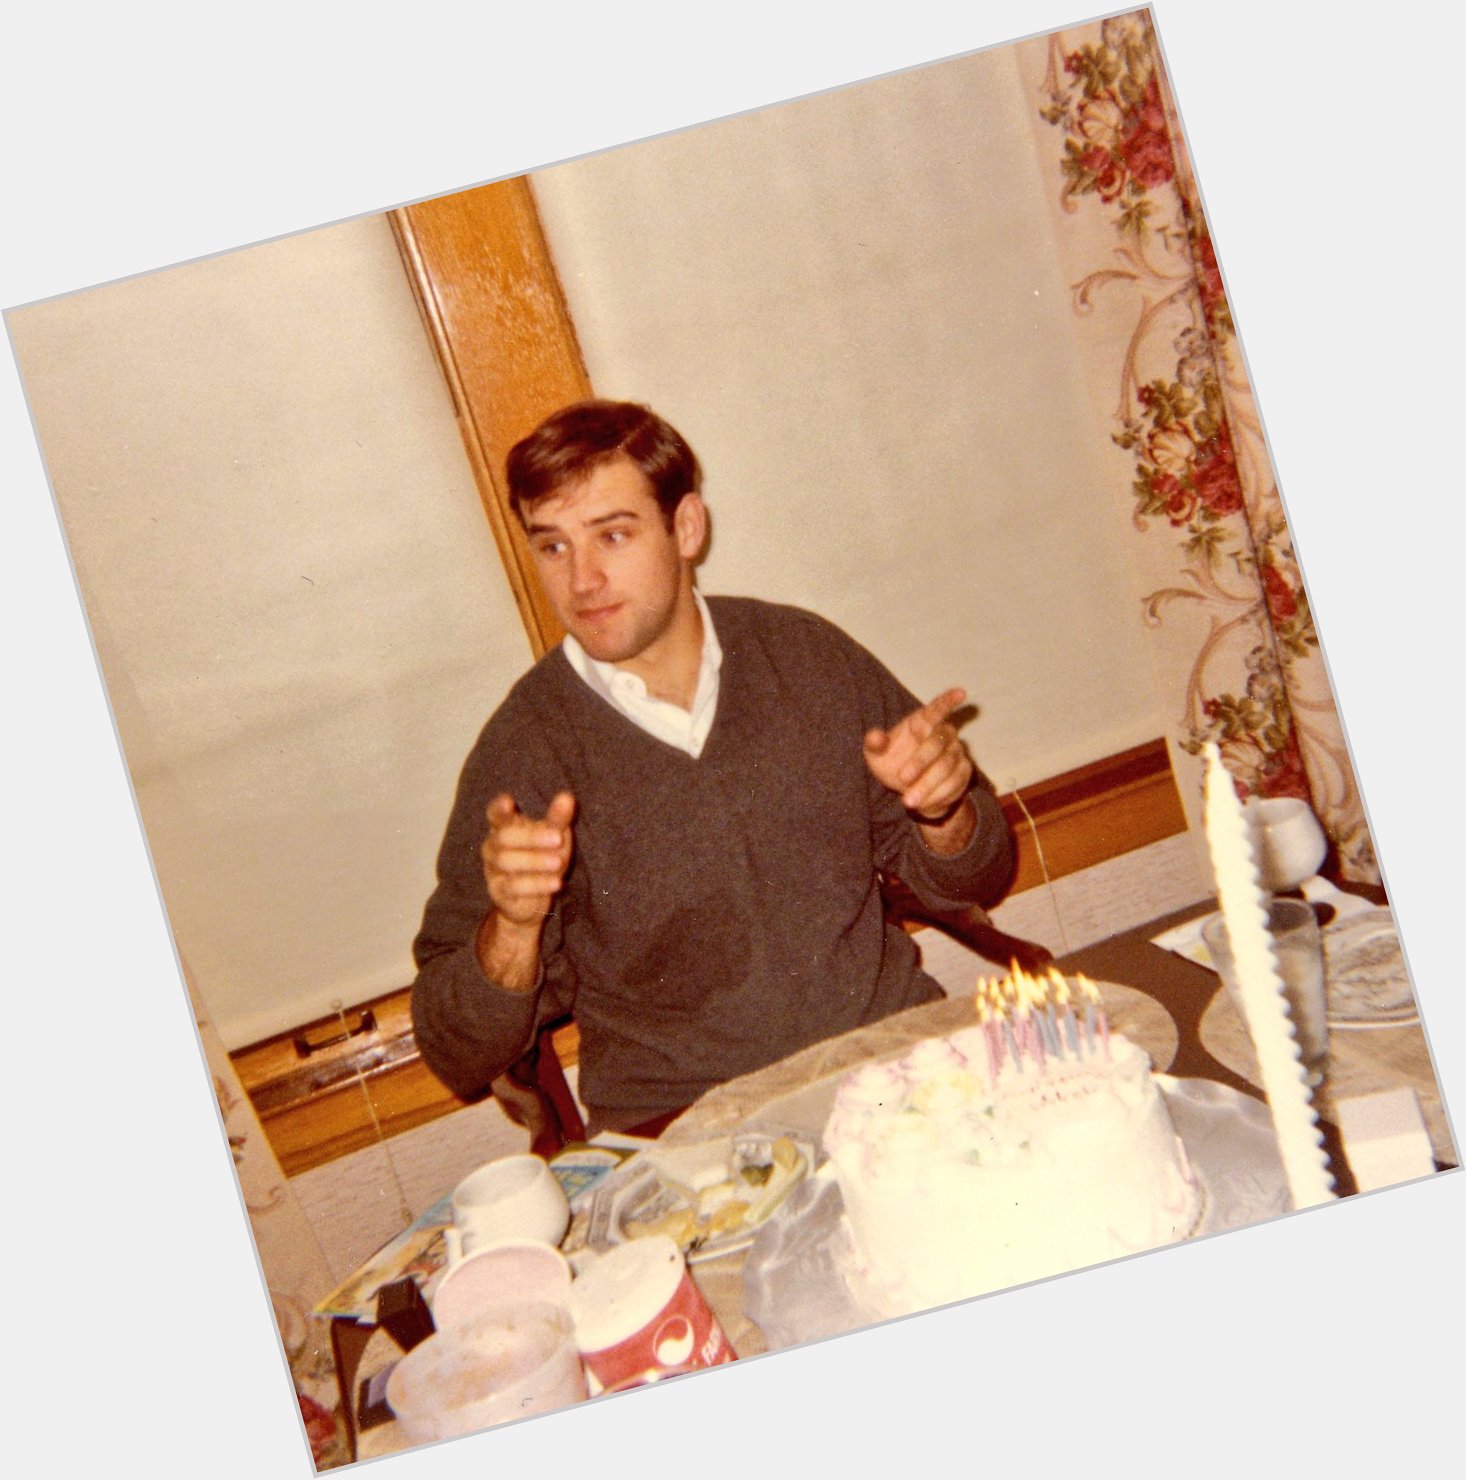  Happy birthday! Here s a young Joe Biden and your cake! 